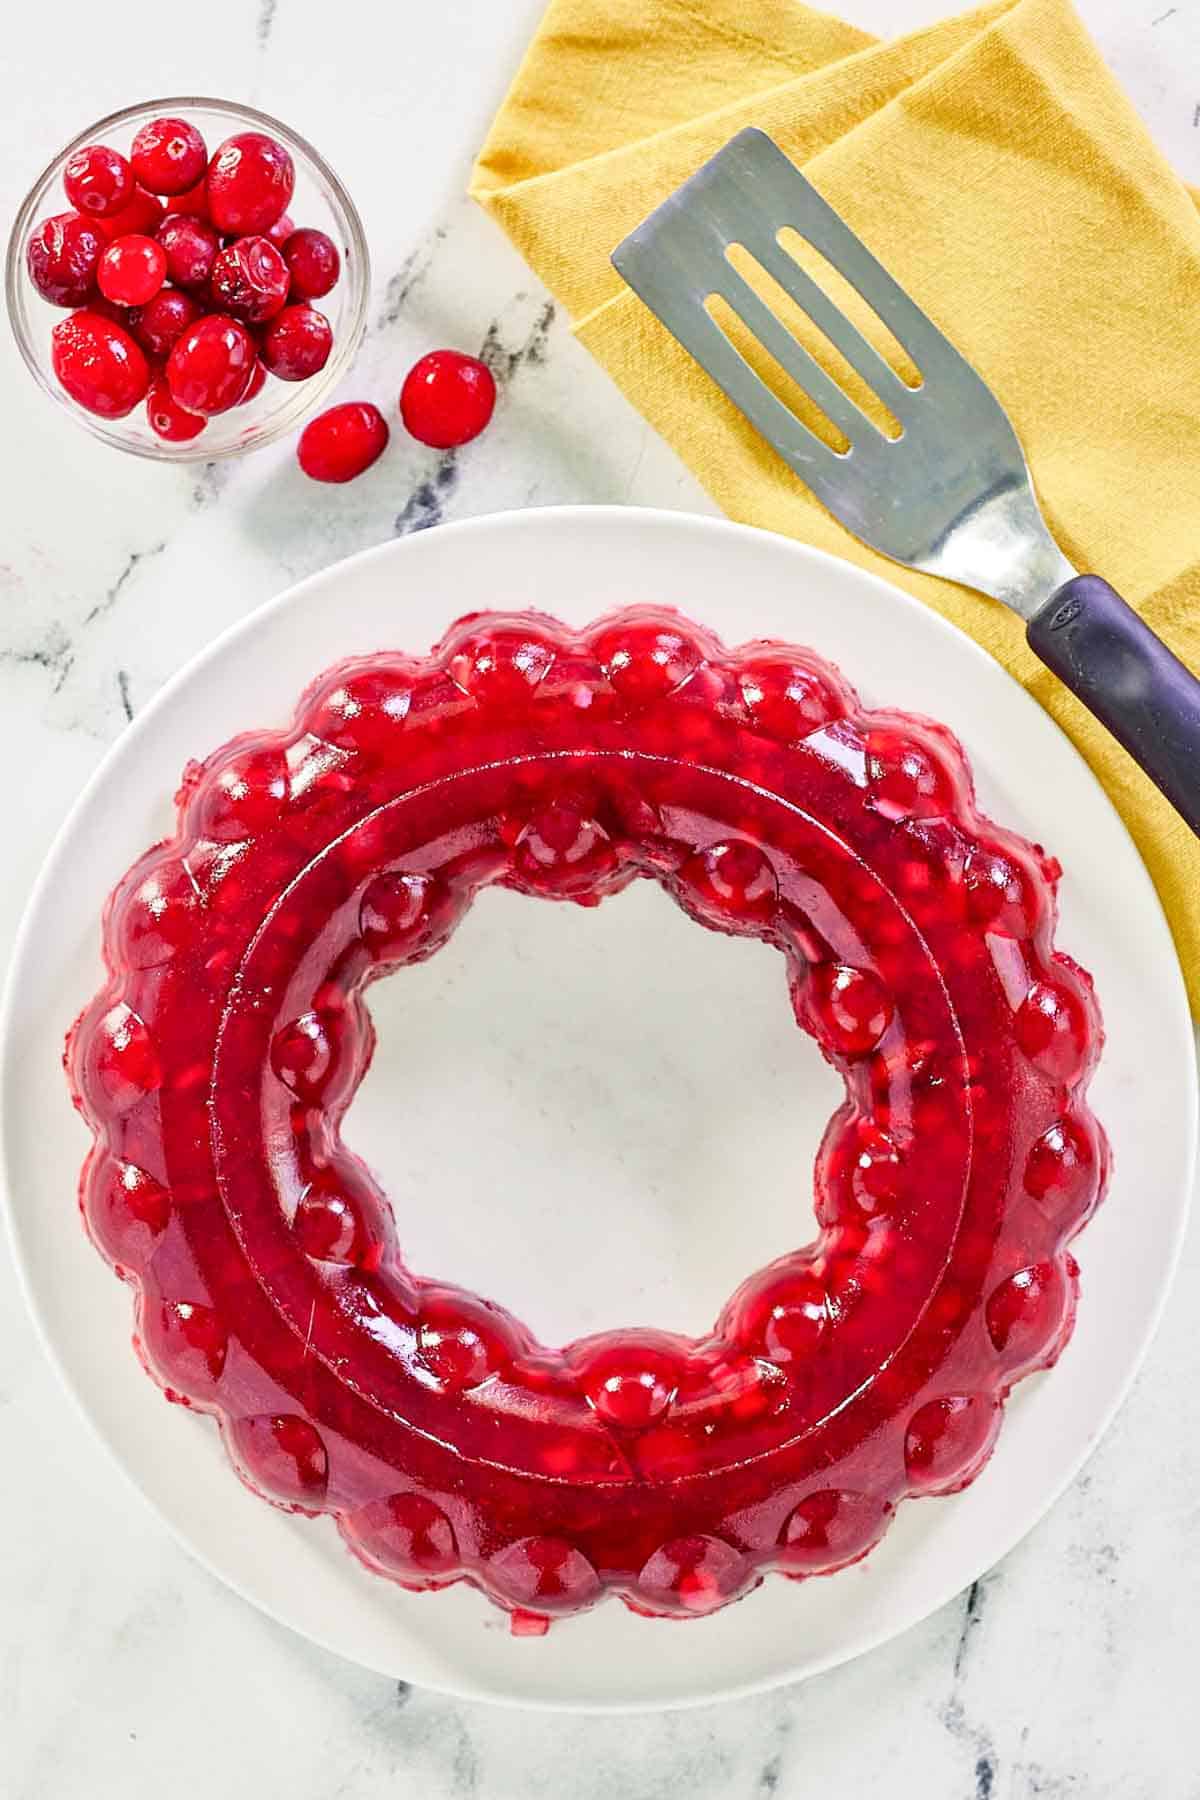 Cranberry jello salad and a bowl of cranberries.